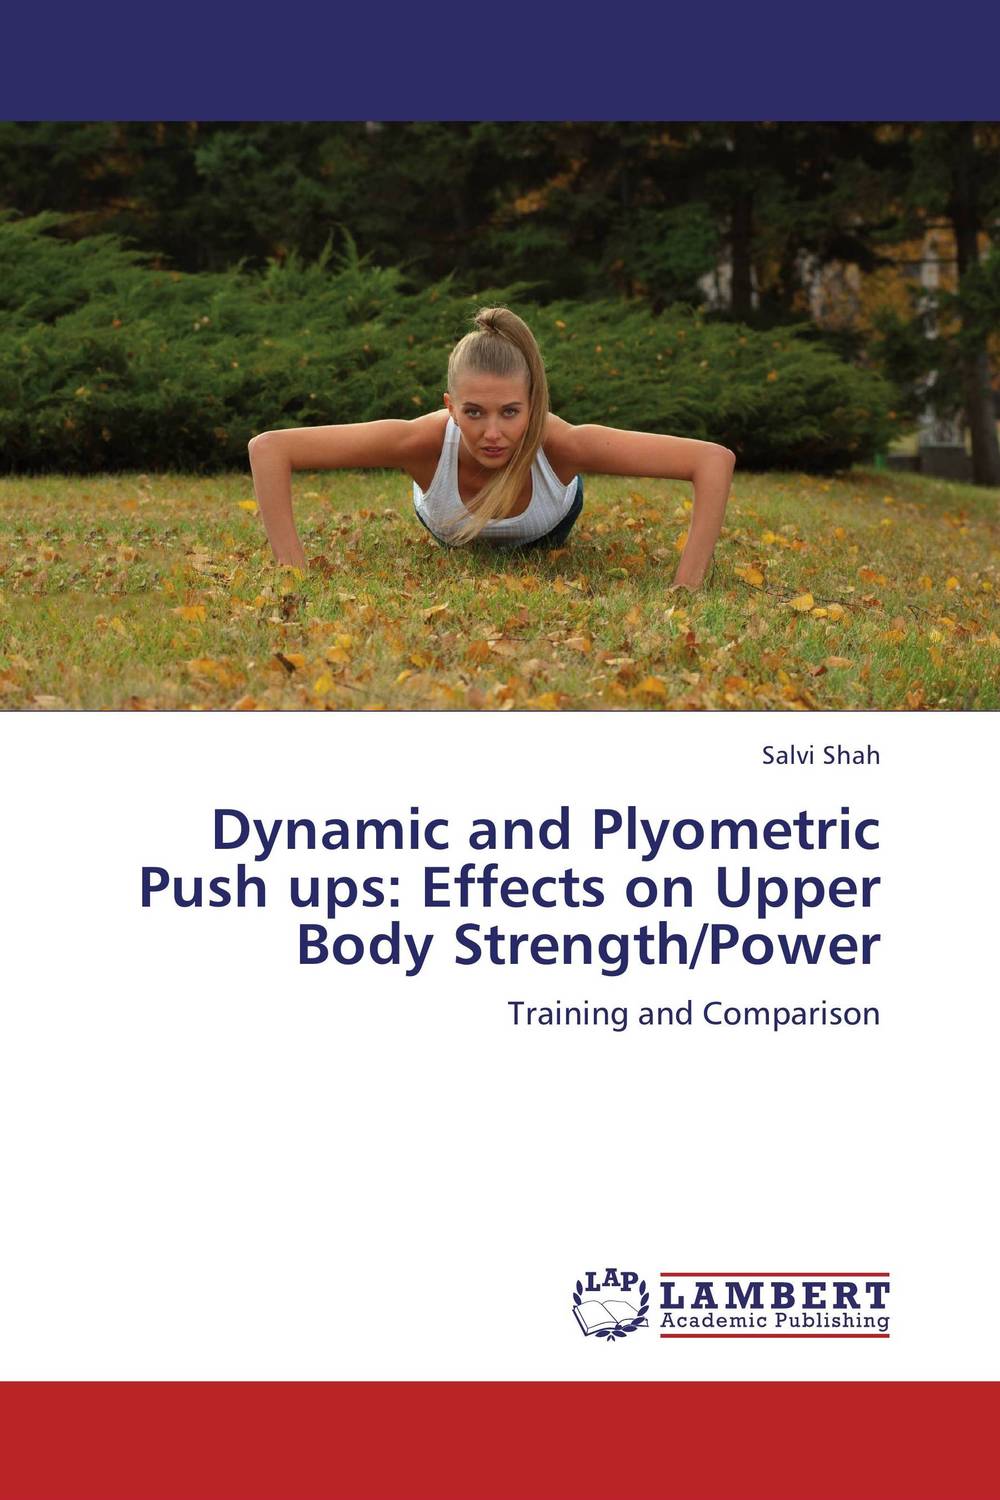 Dynamic and Plyometric Push ups: Effects on Upper Body Strength/Power